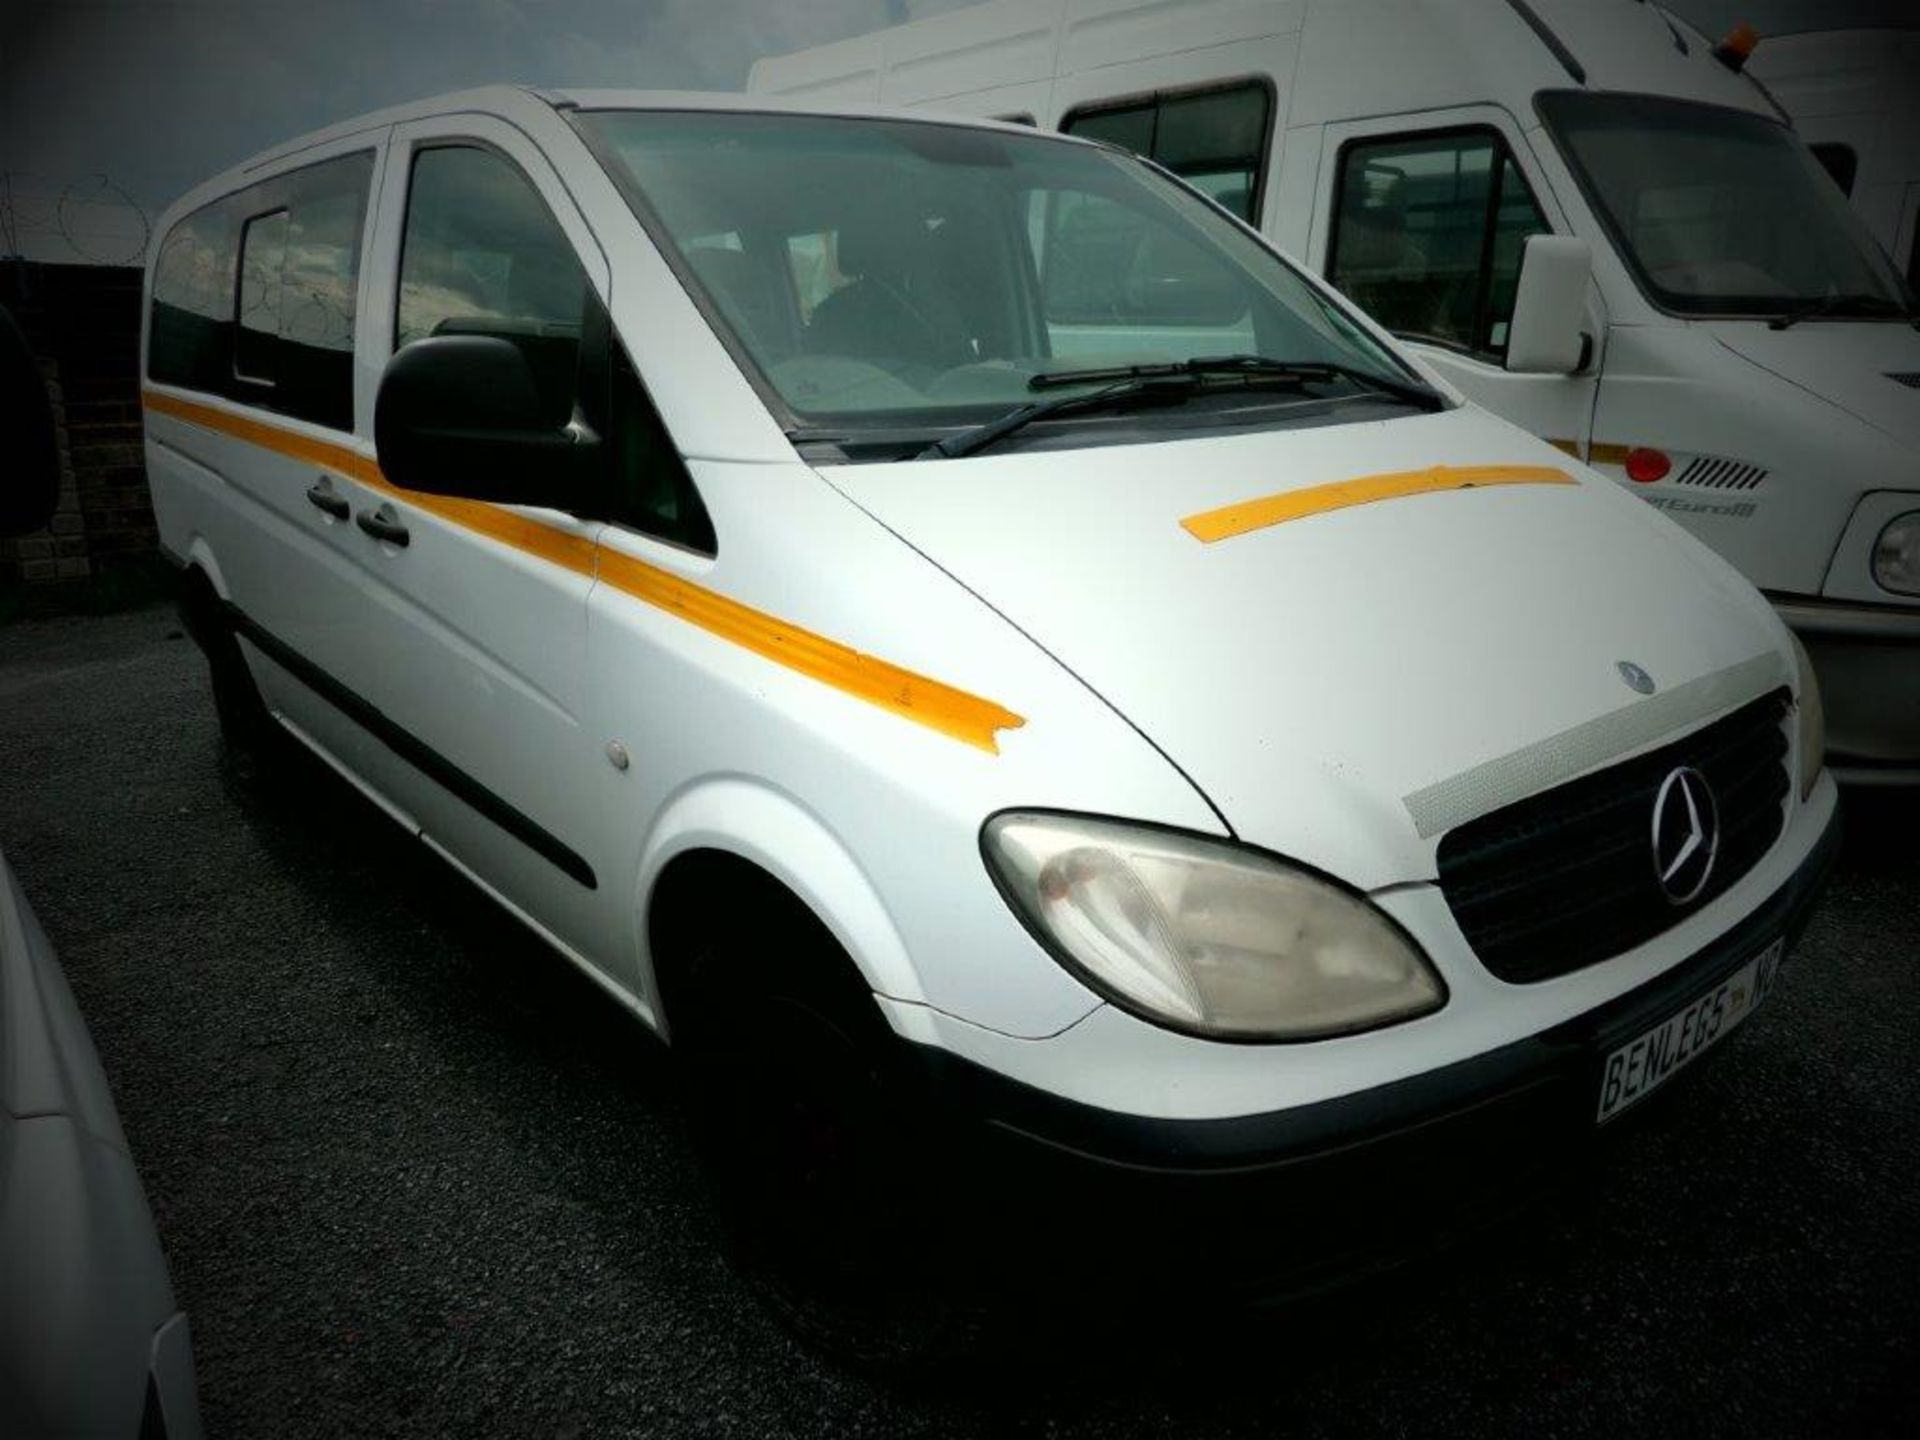 2007 Mercedes Benz Vito (8Seater) - Image 4 of 5